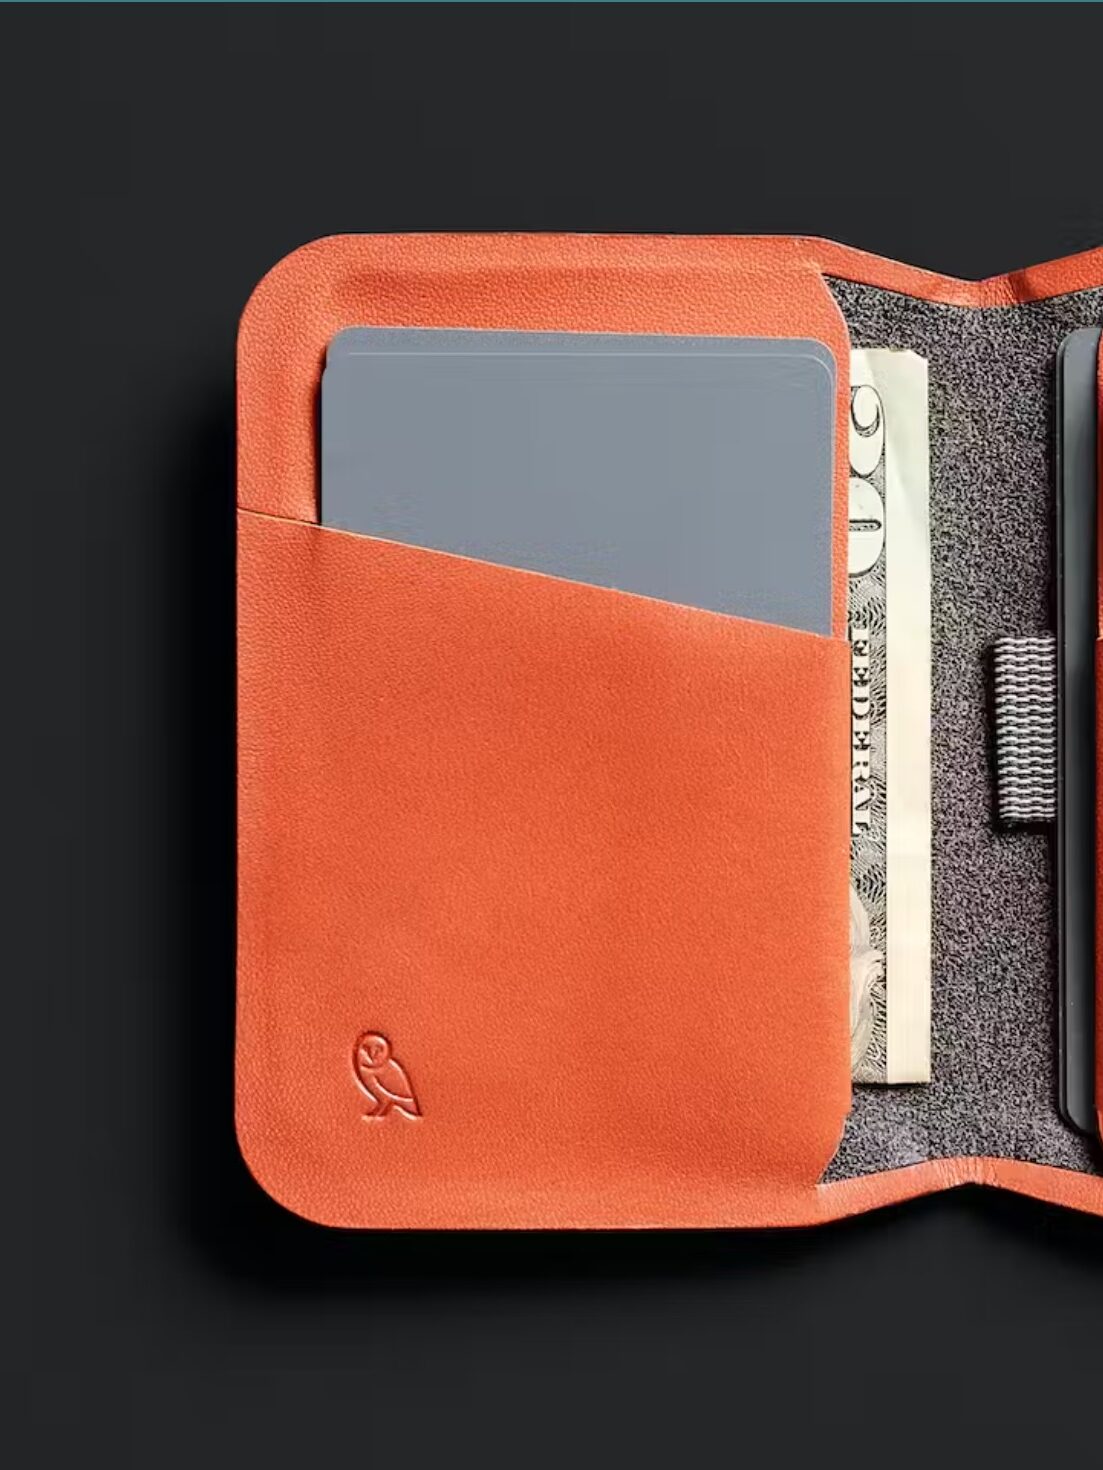 Half of an open orange wallet with cards and money visible.